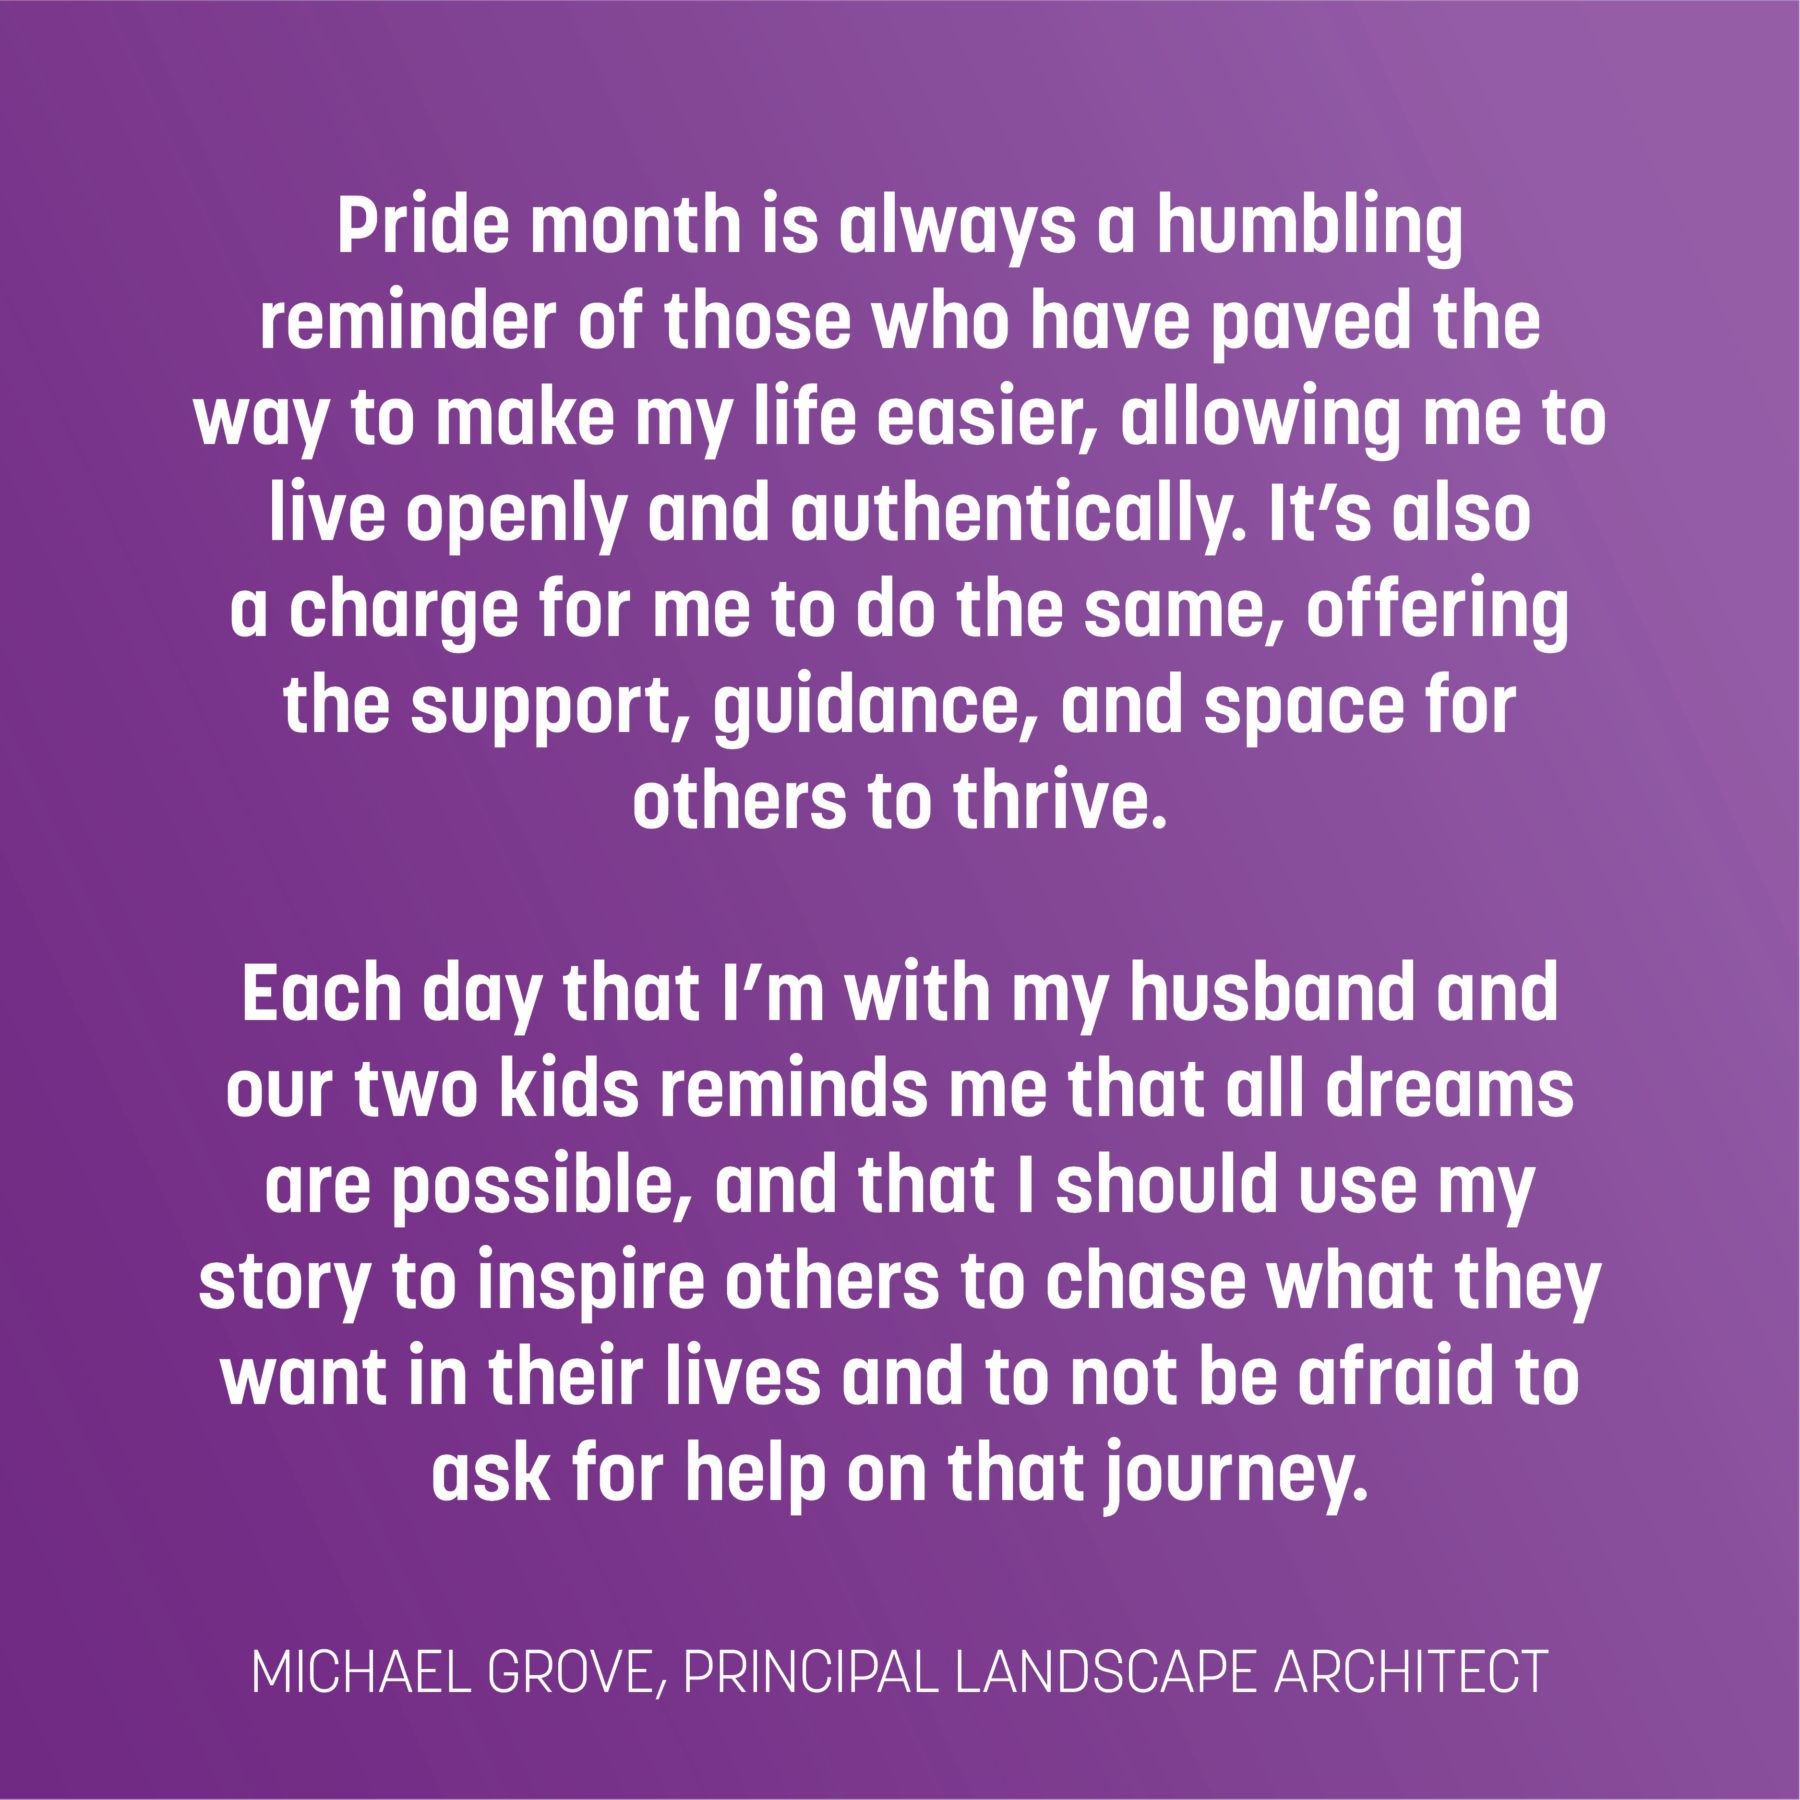 Text on purple gradient reads: Pride month is always a humbling reminder of those who have paved the way to make my life easier, allowing me to live openly and authentically. It’s also a charge for me to do the same, offering the support, guidance, and space for others to thrive. Each day that I’m with my husband and our two kids reminds me that all dreams are possible, and that I should use my story to inspire others to chase what they want in their lives and to not be afraid to ask for help on that journey. -Michael Grove, principal landscape architect